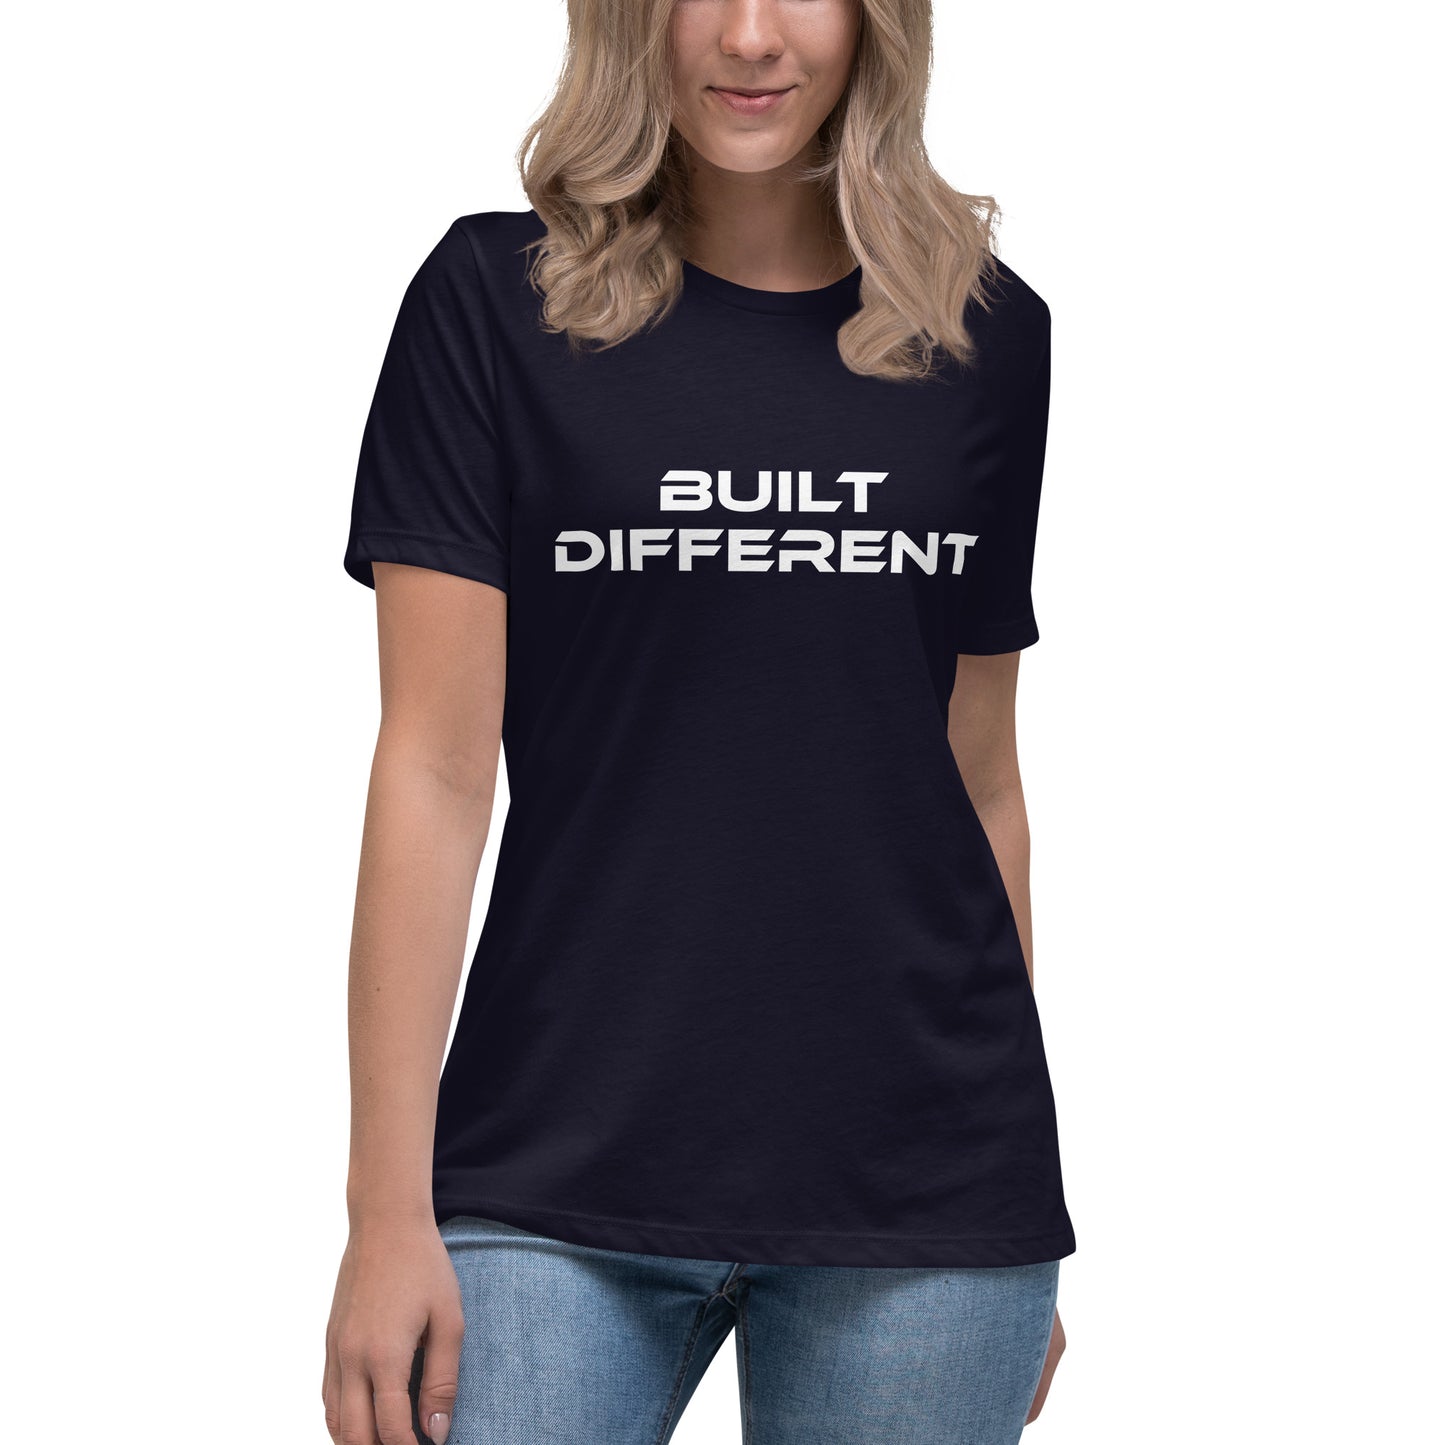 Built different Women's Relaxed T-Shirt-Perfect for a Laid-Back, Chic Look